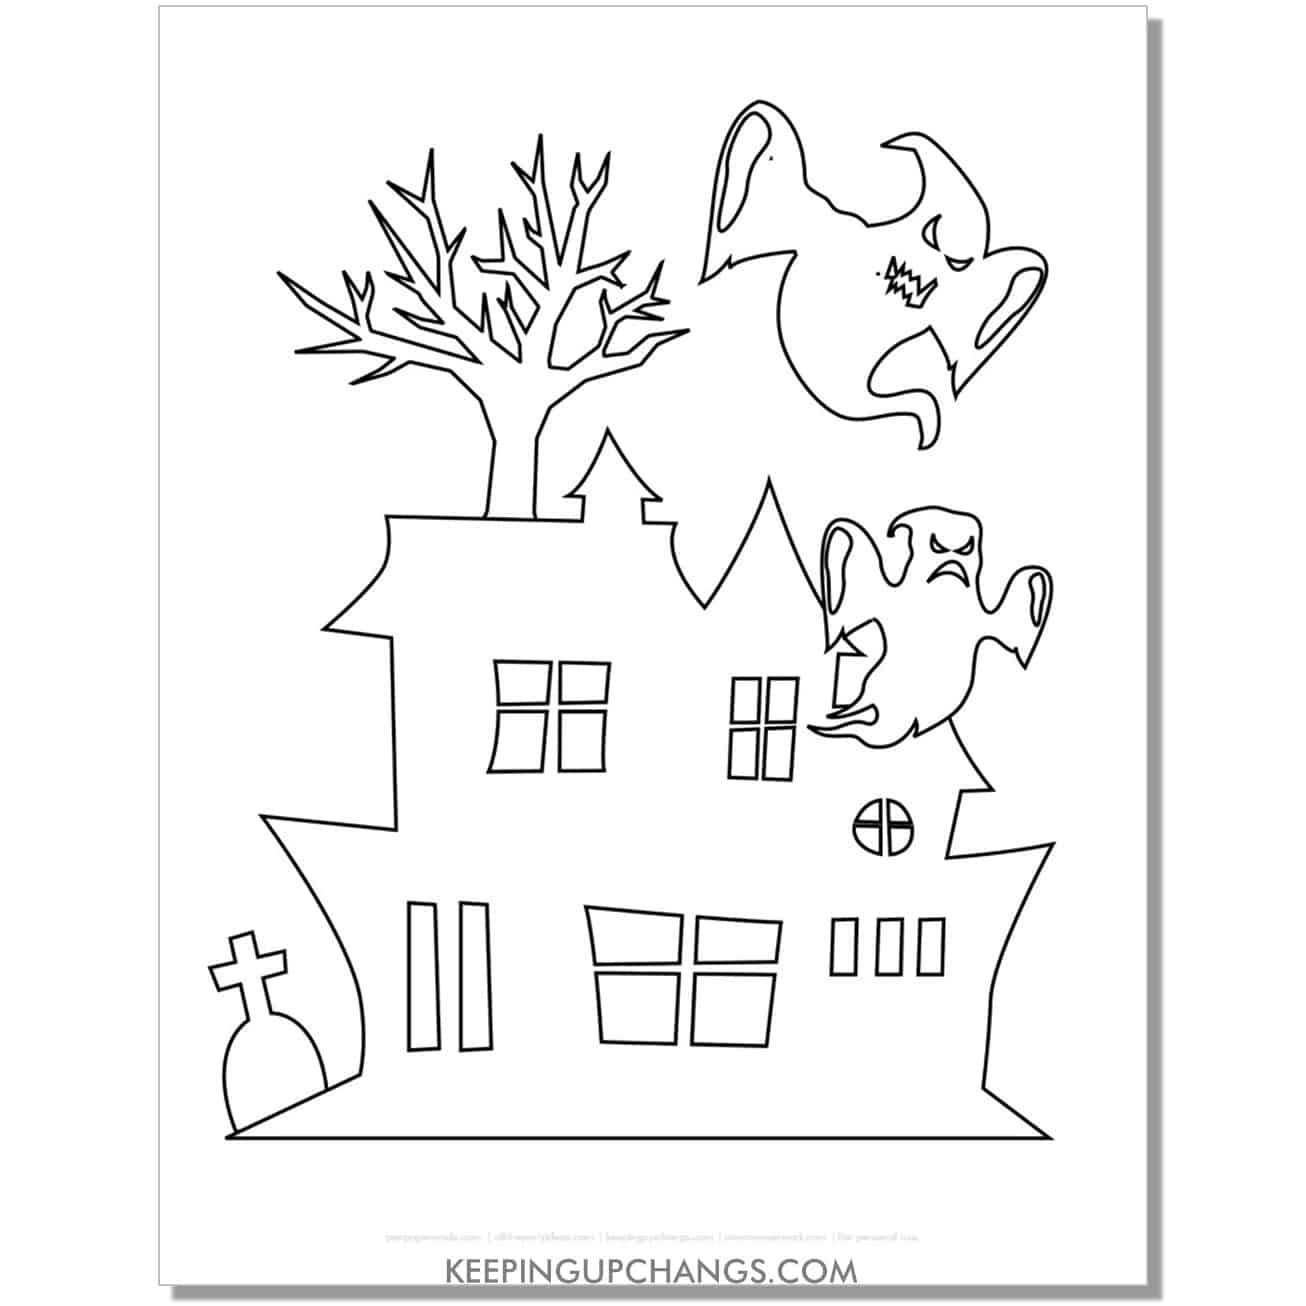 free easy haunted house outline with scary ghosts coloring page.